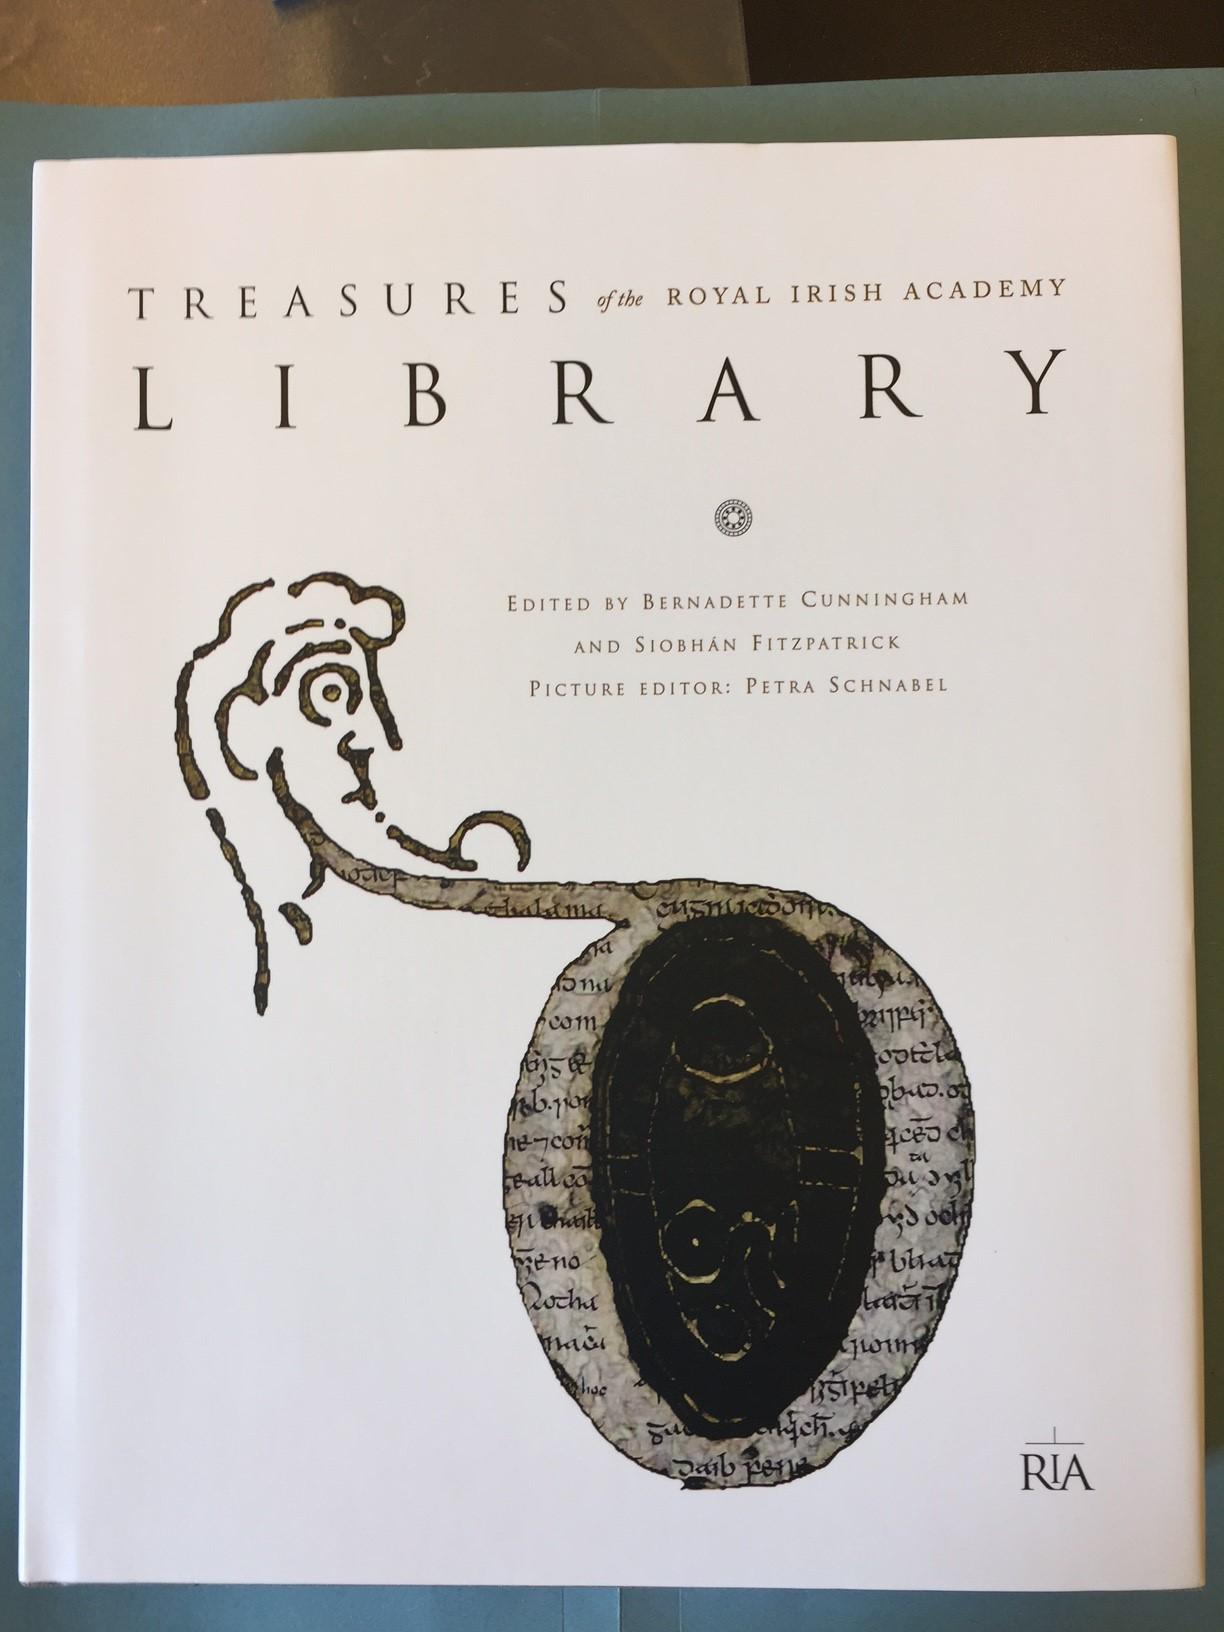 A book compilation on the treasures of the Royal Irish Academy